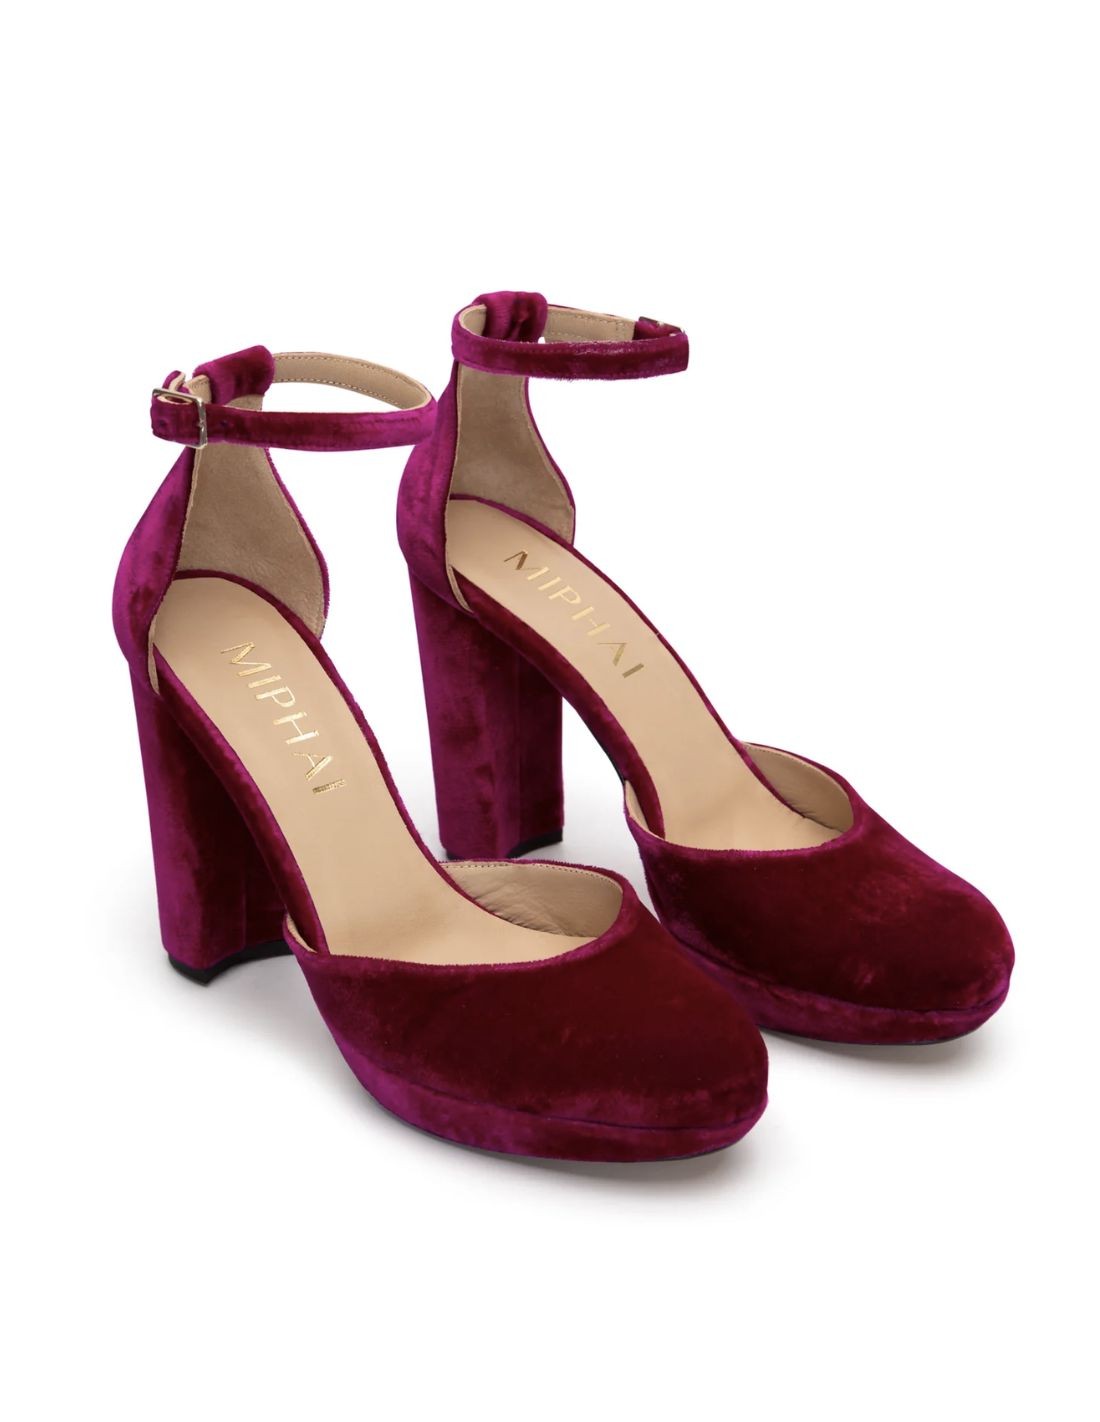 Velvet party shoes for winter guests | INVITADISIMA